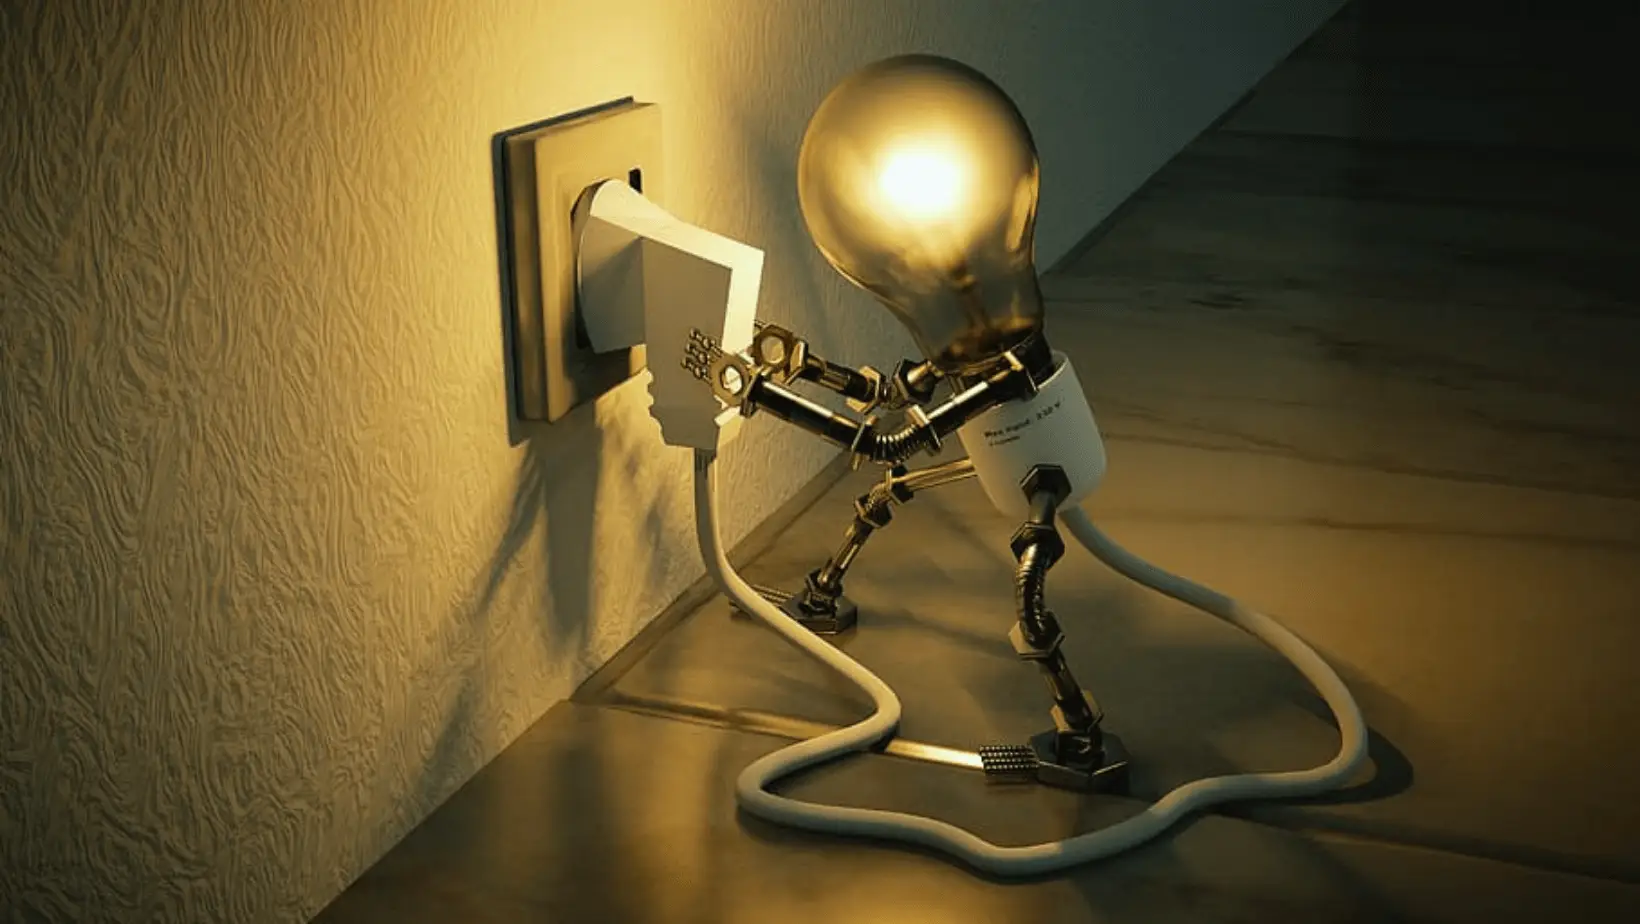 Photo of robotic electric bulb holding a switch